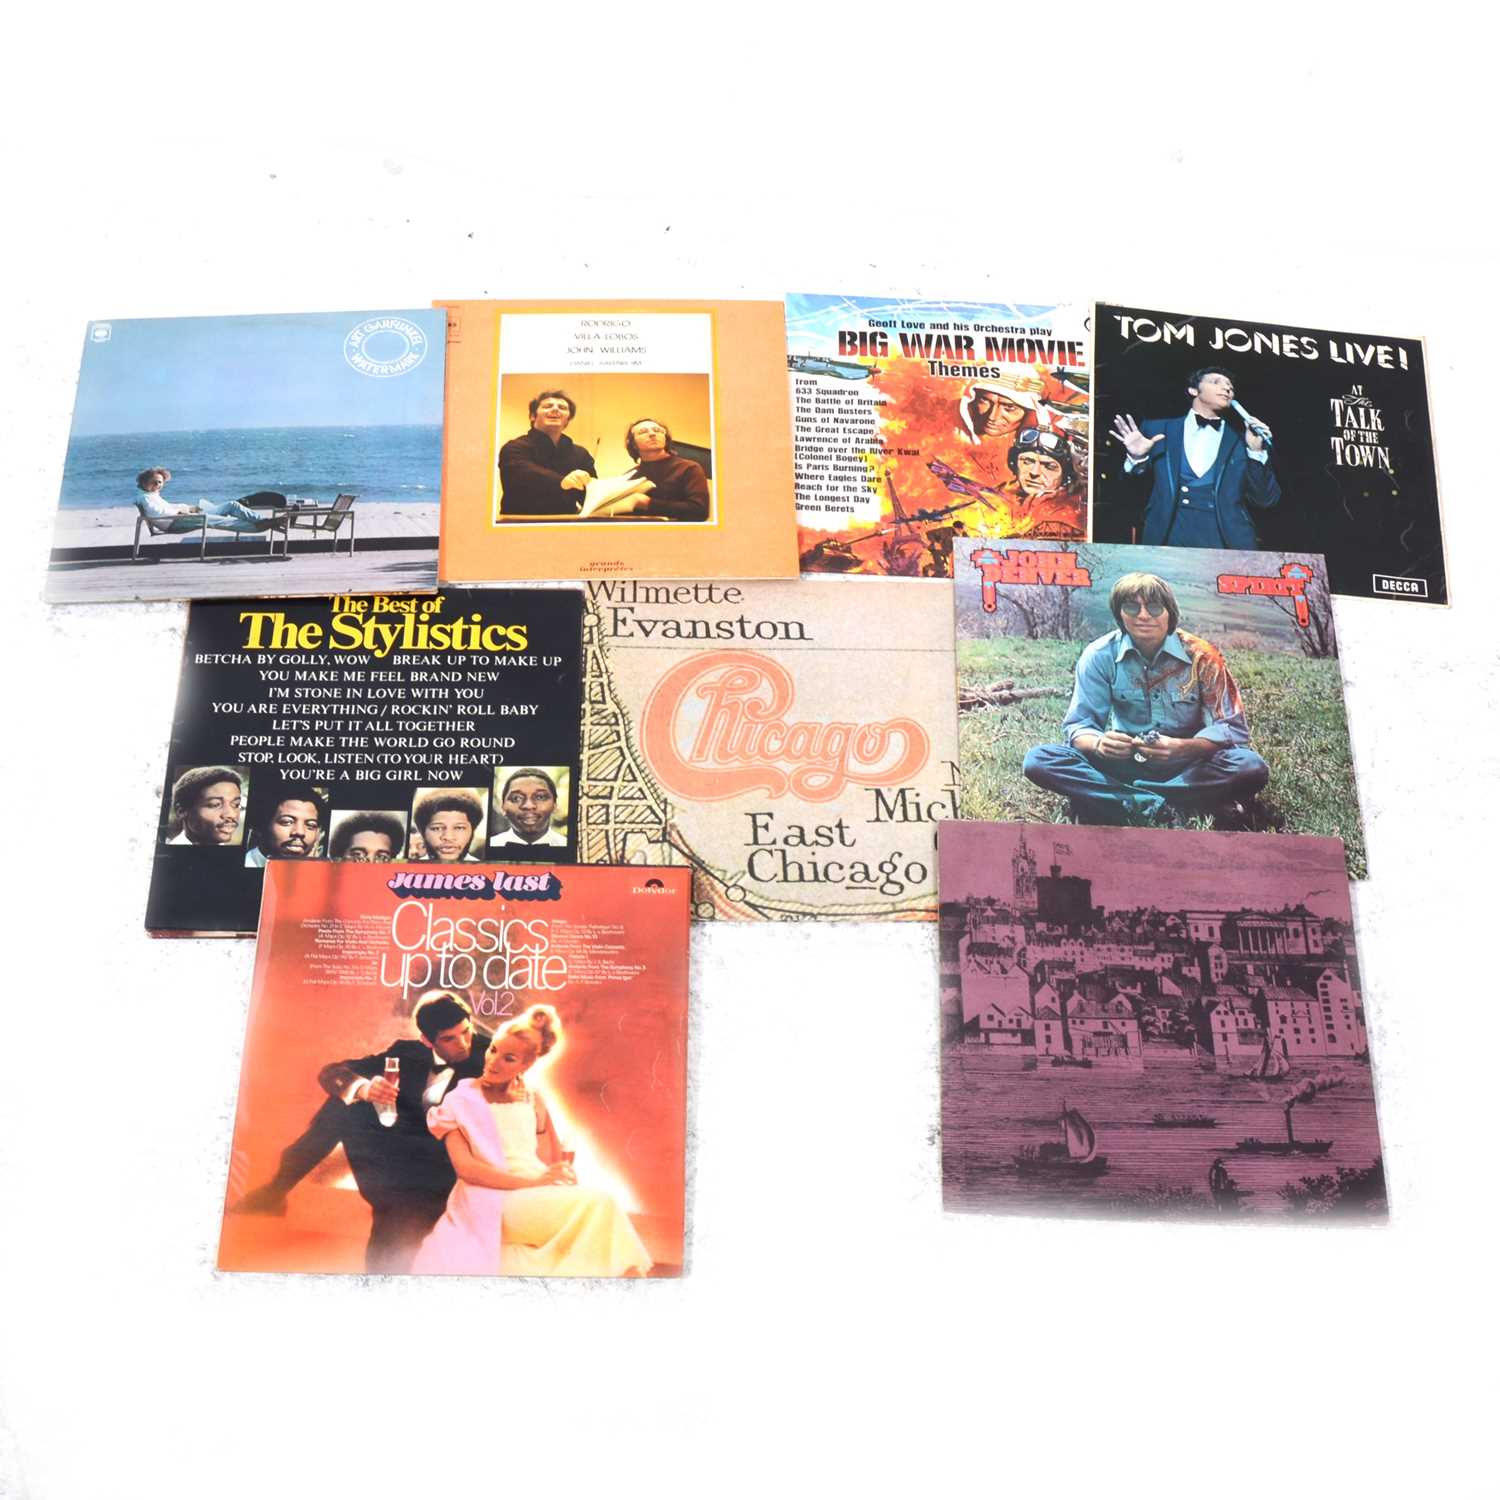 Lot 43 - Aprox sixty-nine LPs including Pink Floyd Dark Side of the Moon, and small collection of 7" singles.